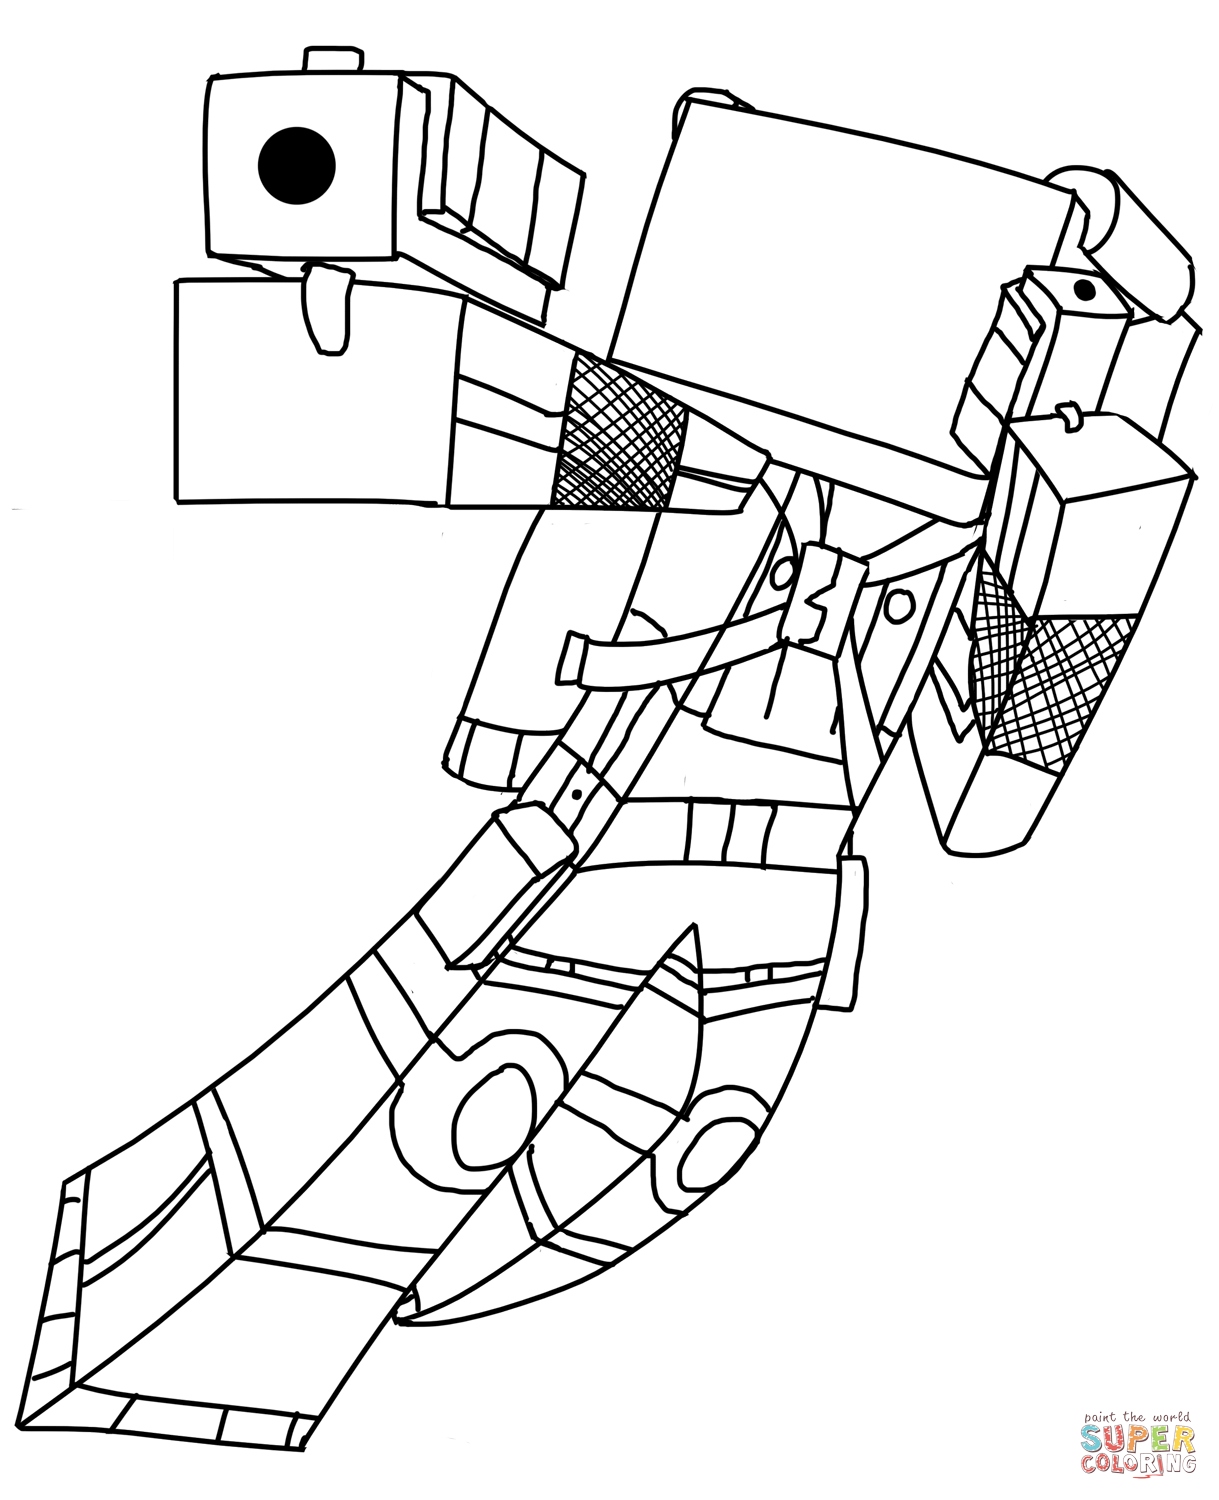 Minecraft Coloring Pages Dantdm at GetColorings.com | Free printable colorings pages to print ...